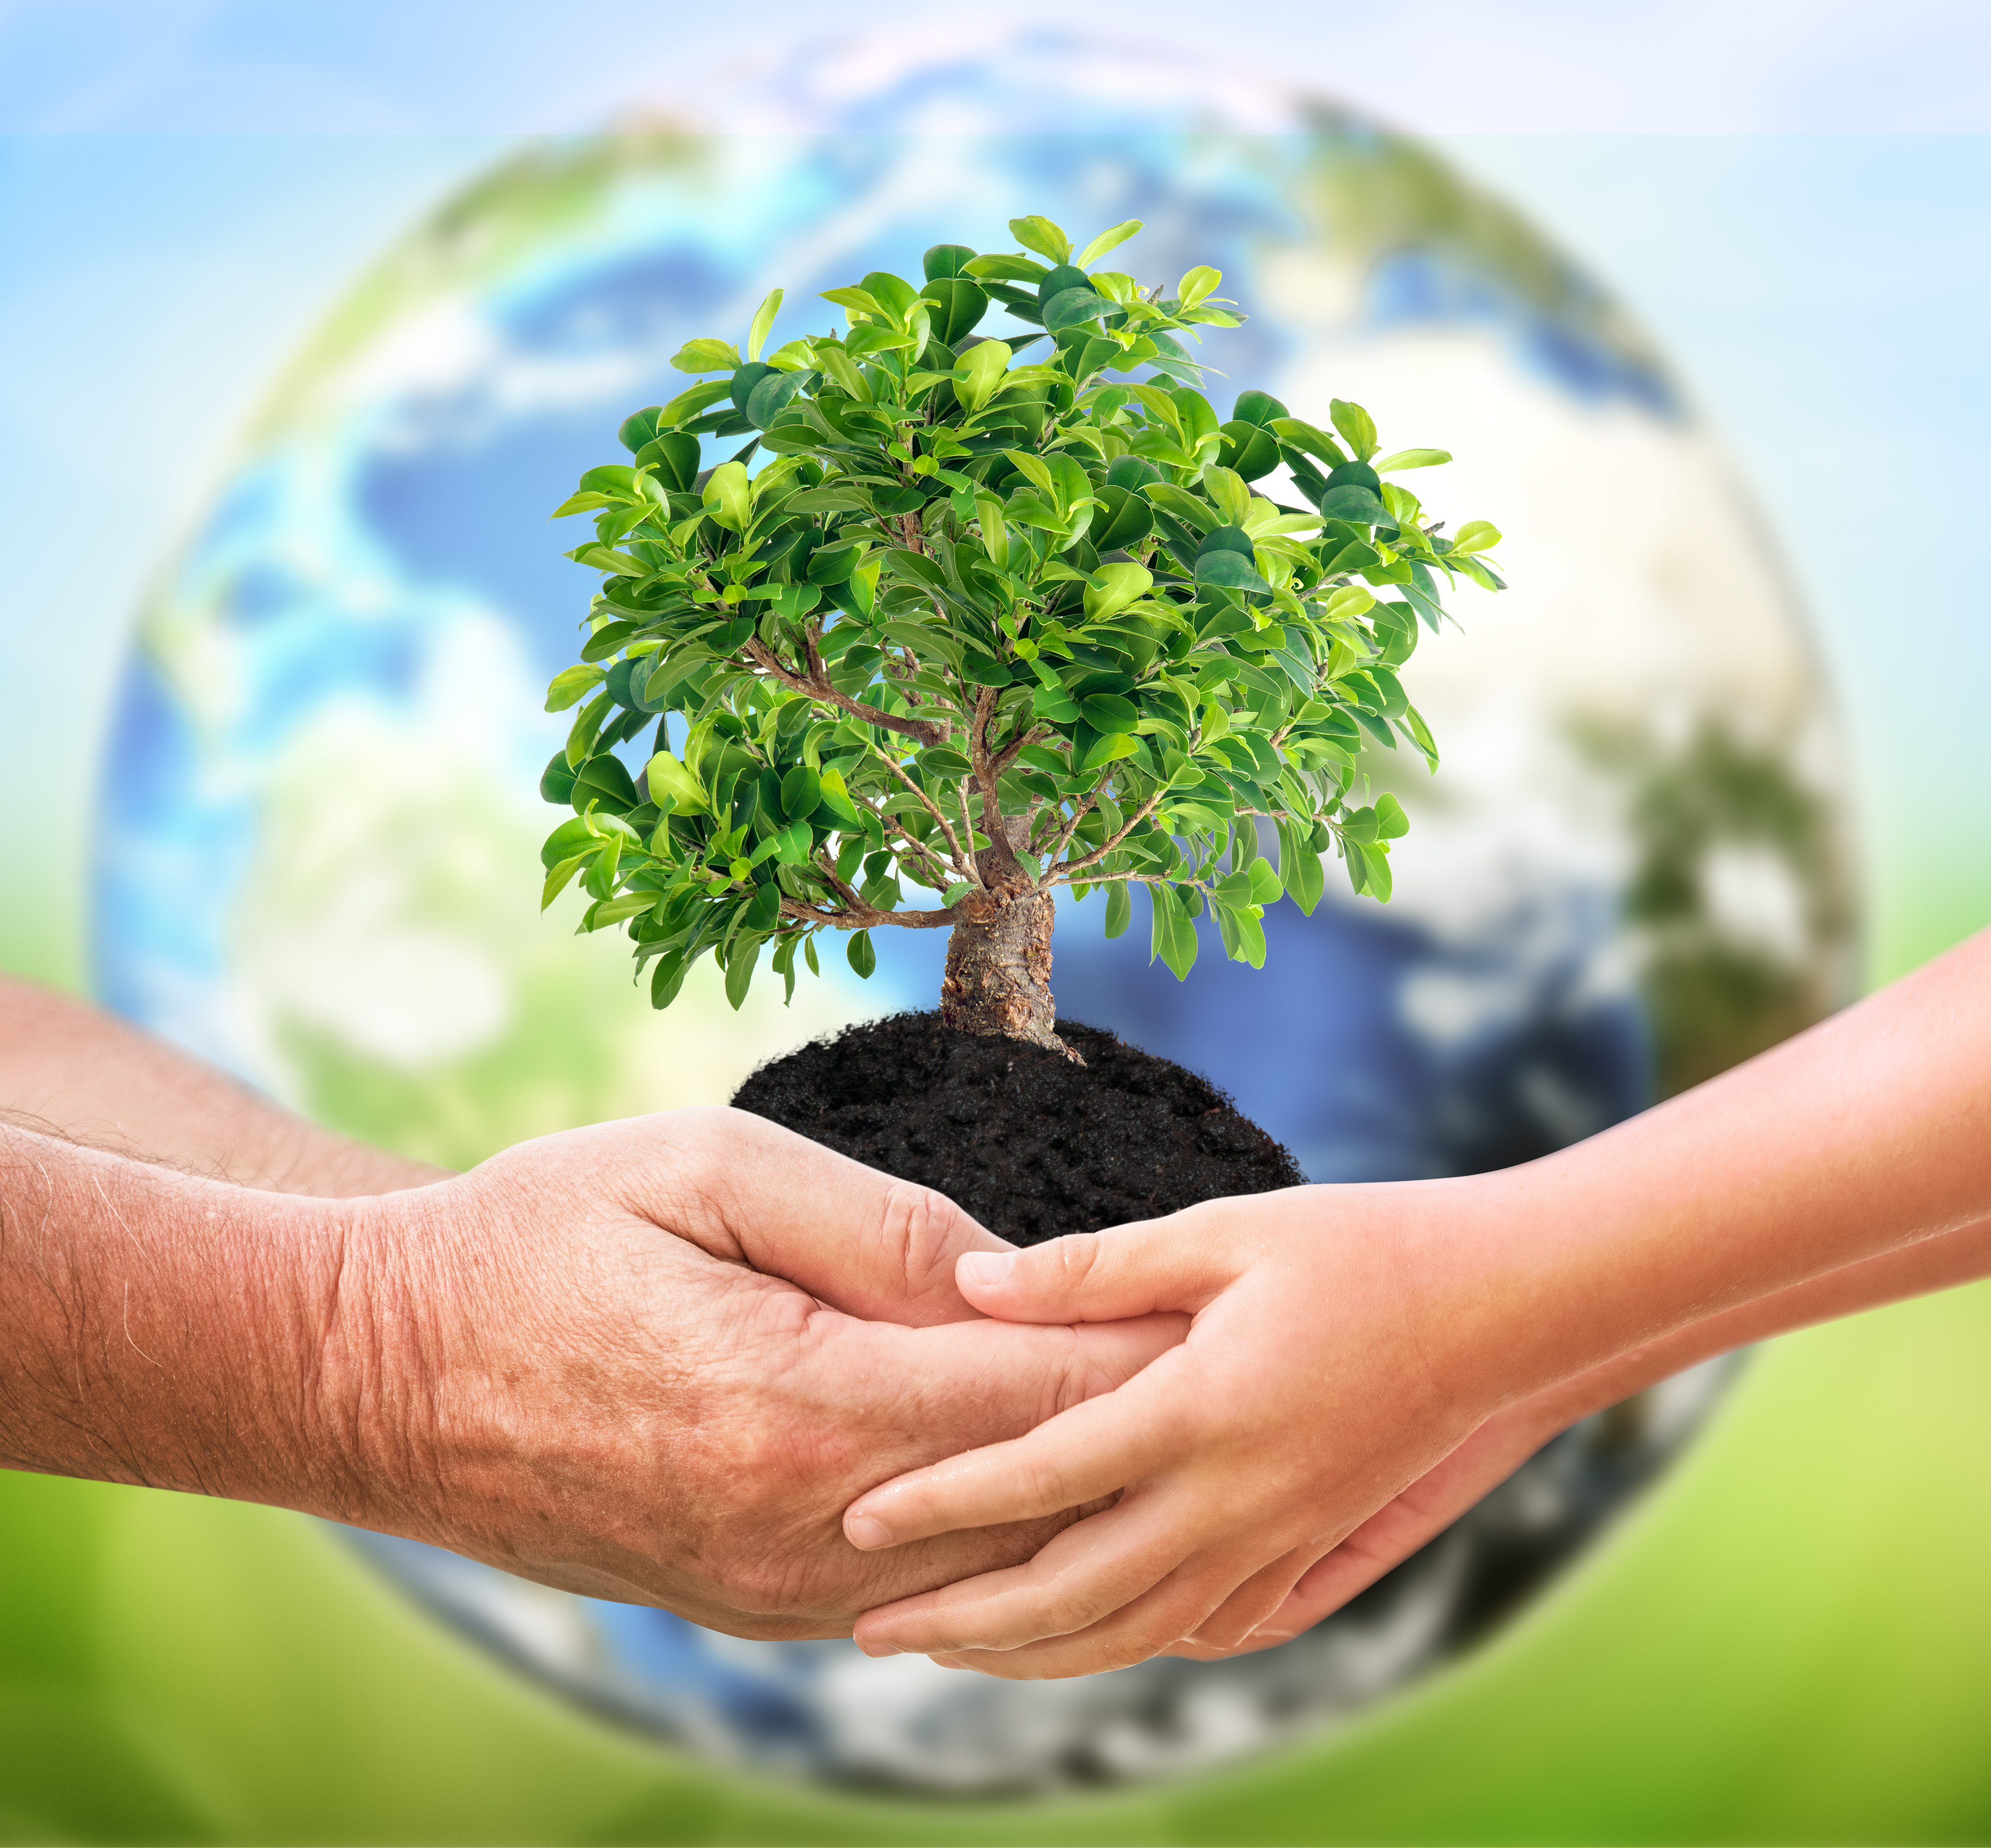 The man holding a tree with baby over planet Earth background.